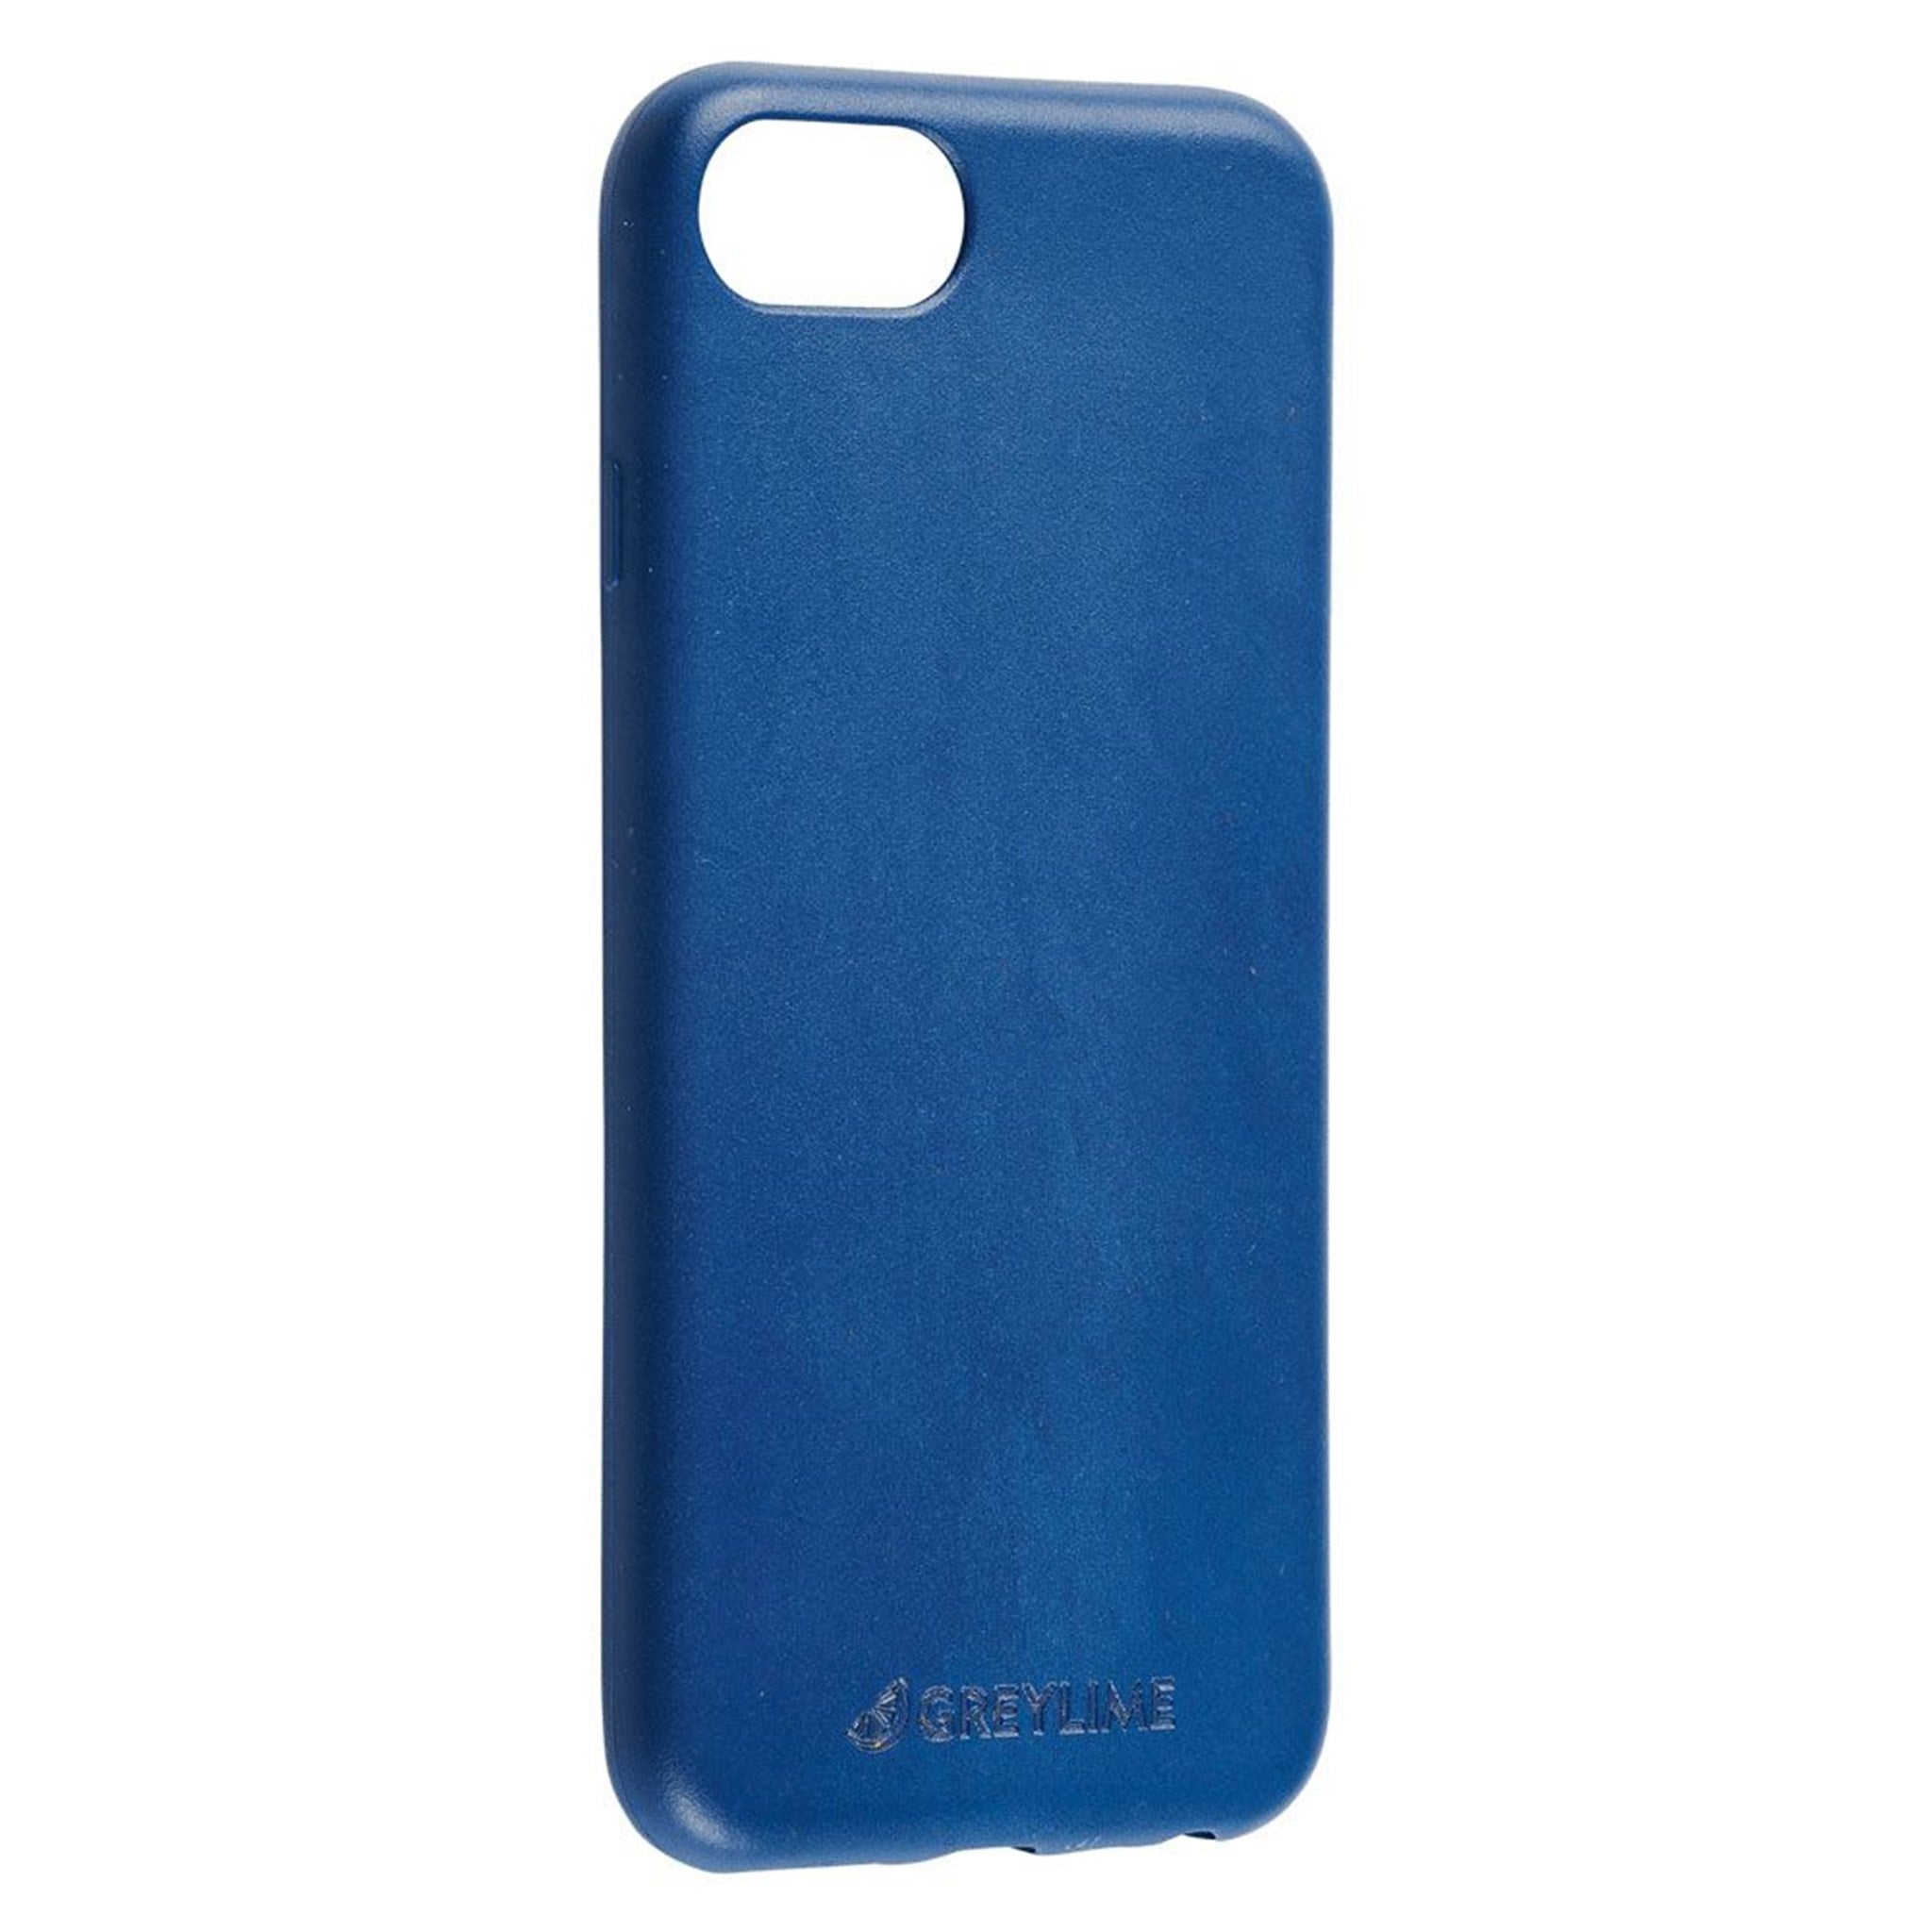 GreyLime-iPhone-6-7-8-Plus-biodegradable-cover-Navy-Blue-COIP678P03-V1.jpg